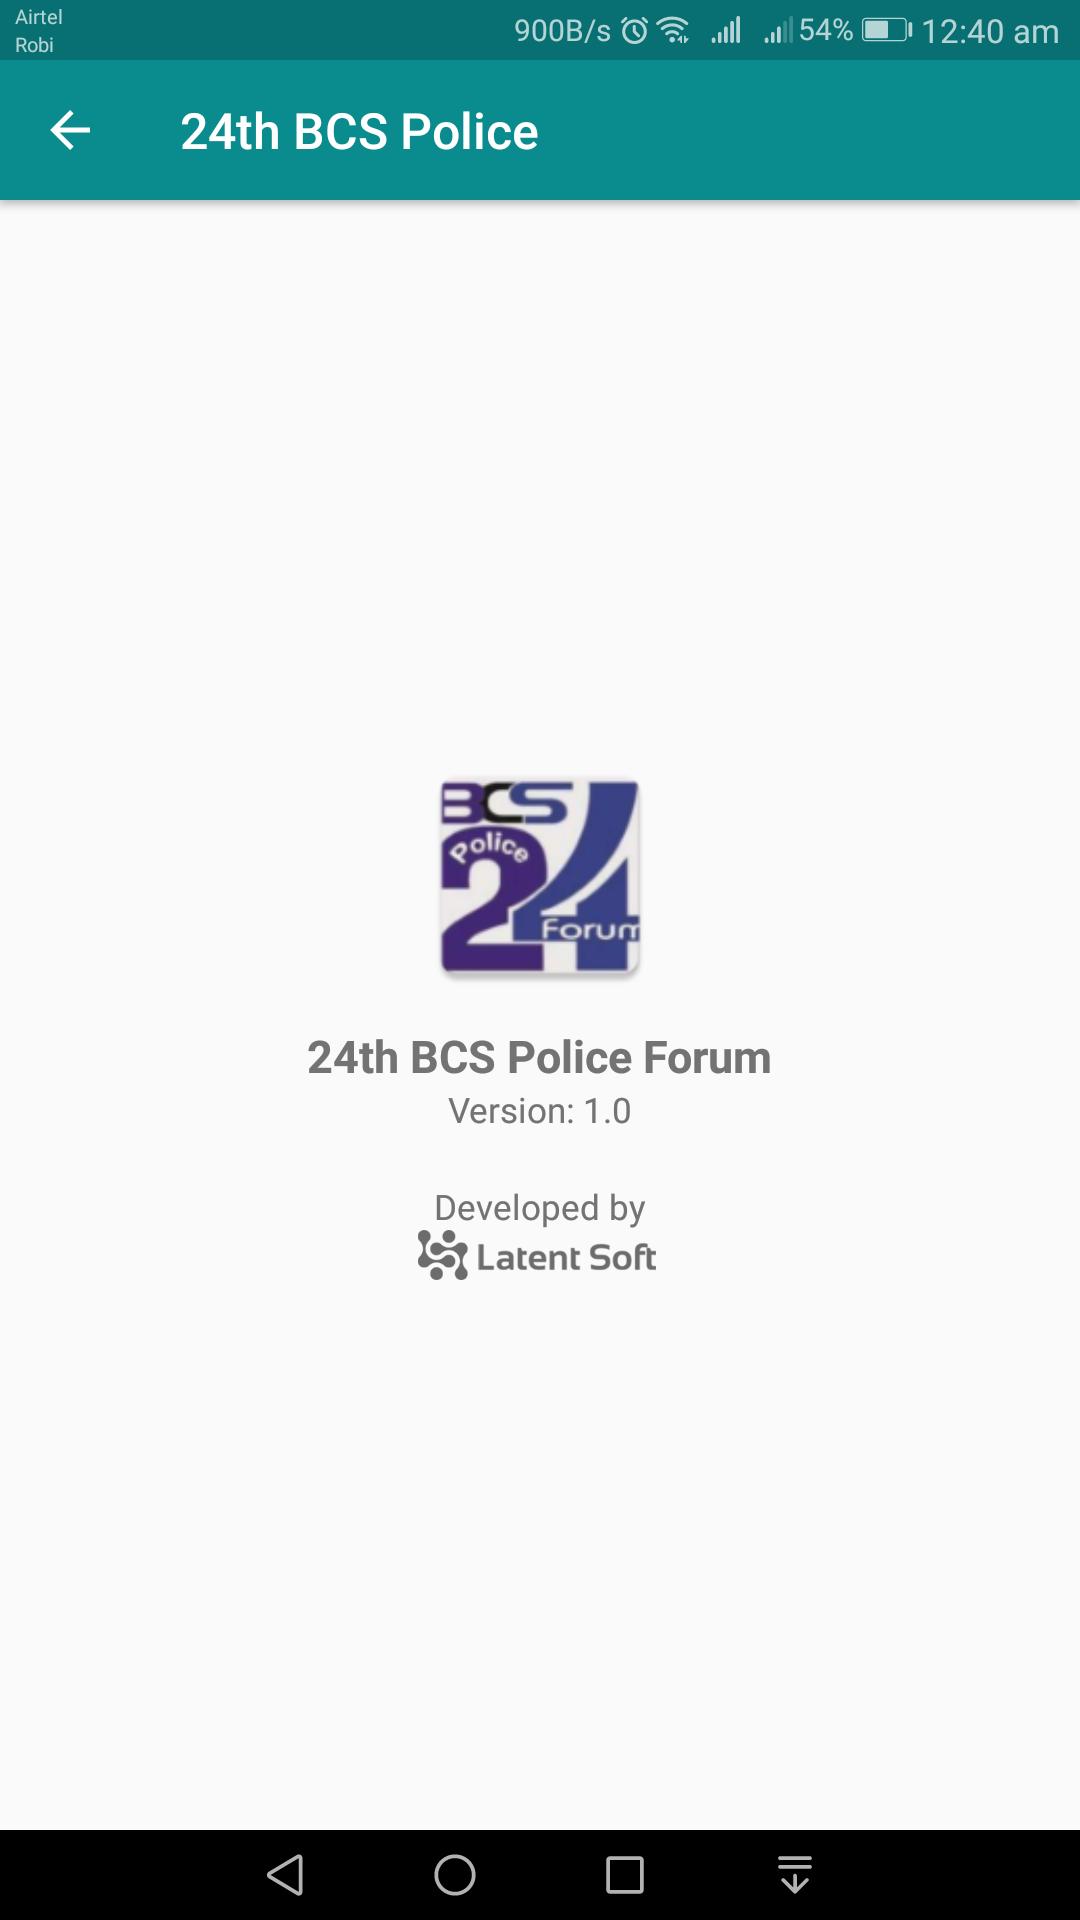 24th BCS Police Forum for Android - APK Download